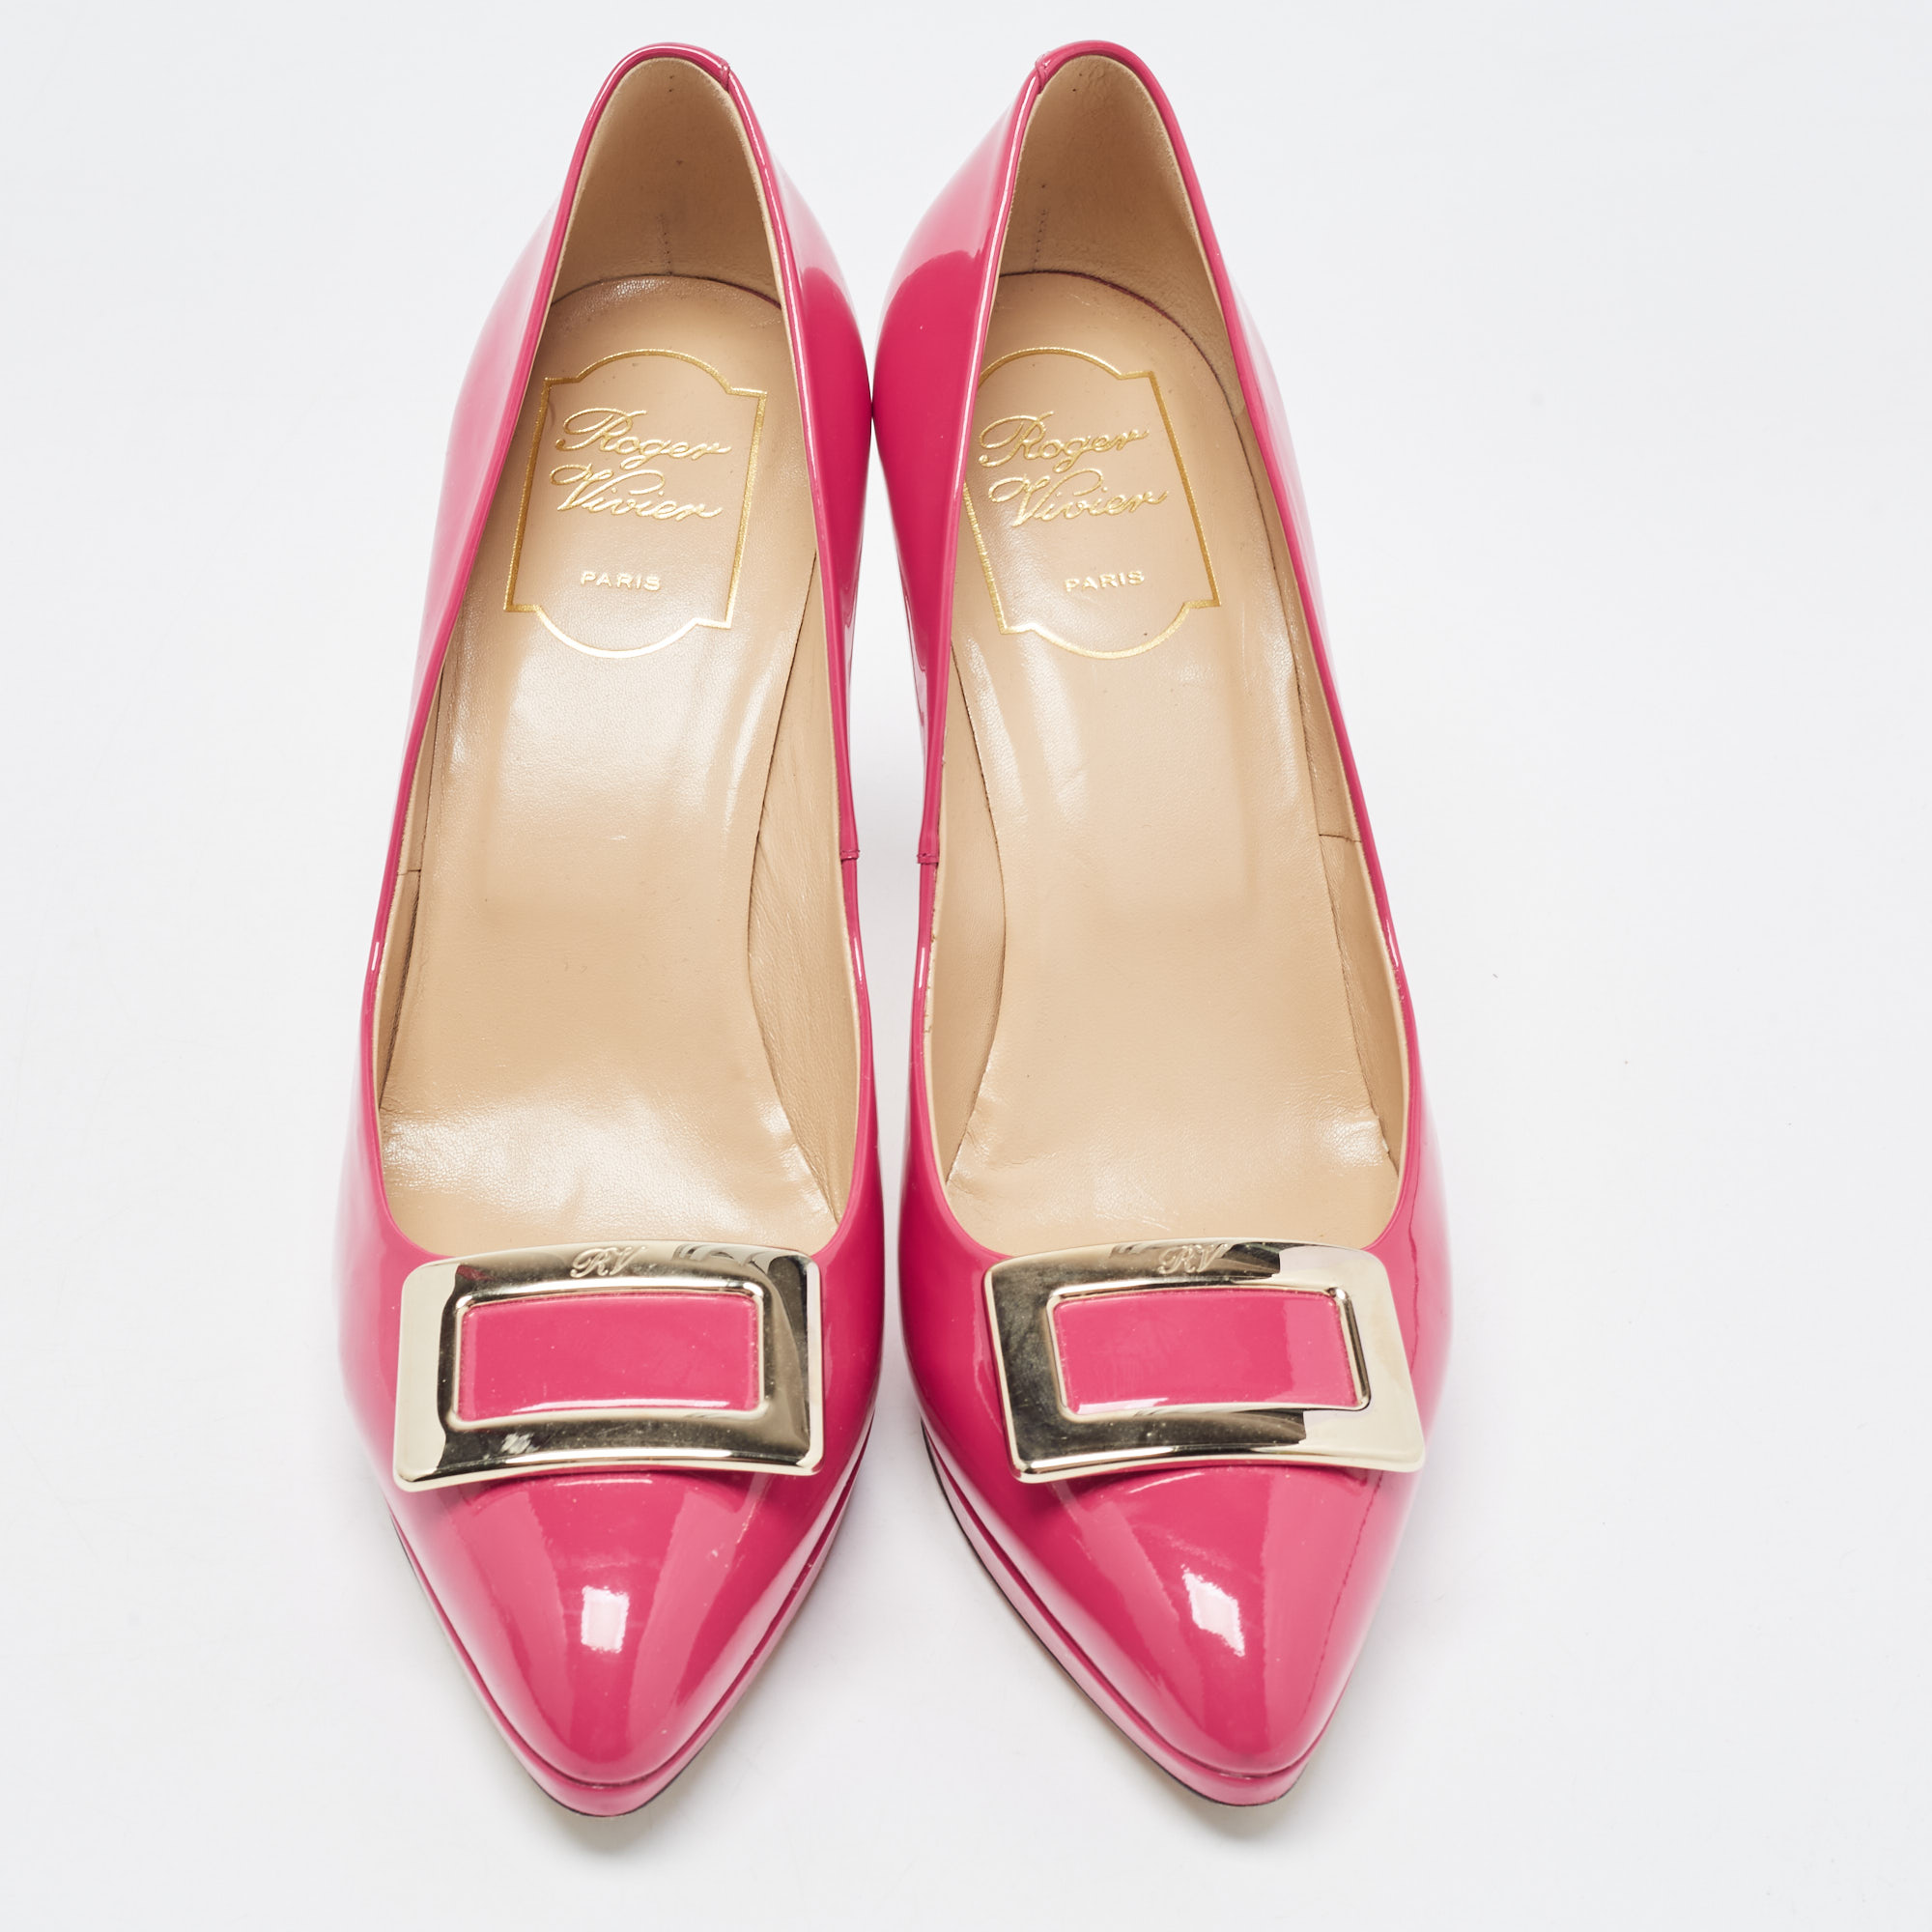 Roger Vivier Red Patent Leather Trompette Pointed Toe Pumps Size 38.5